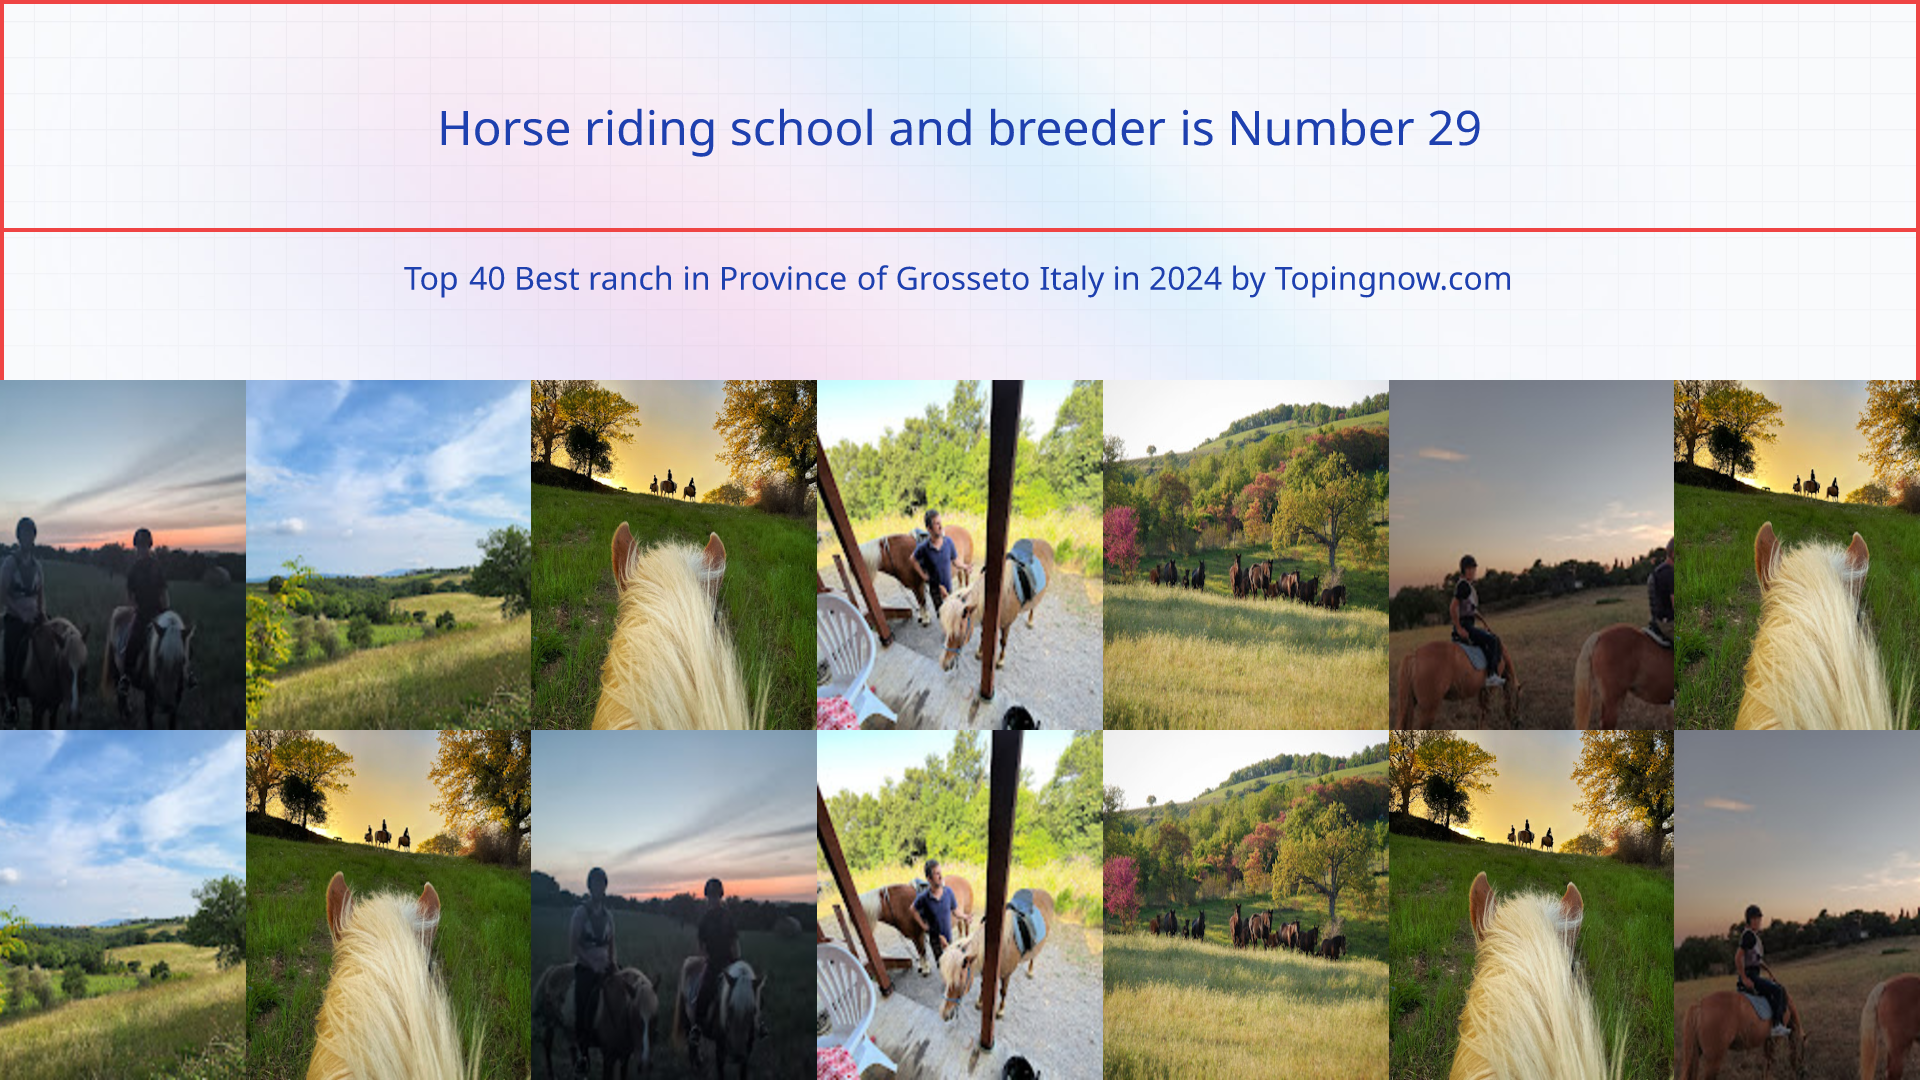 Horse riding school and breeder: Top 40 Best ranch in Province of Grosseto Italy in 2024